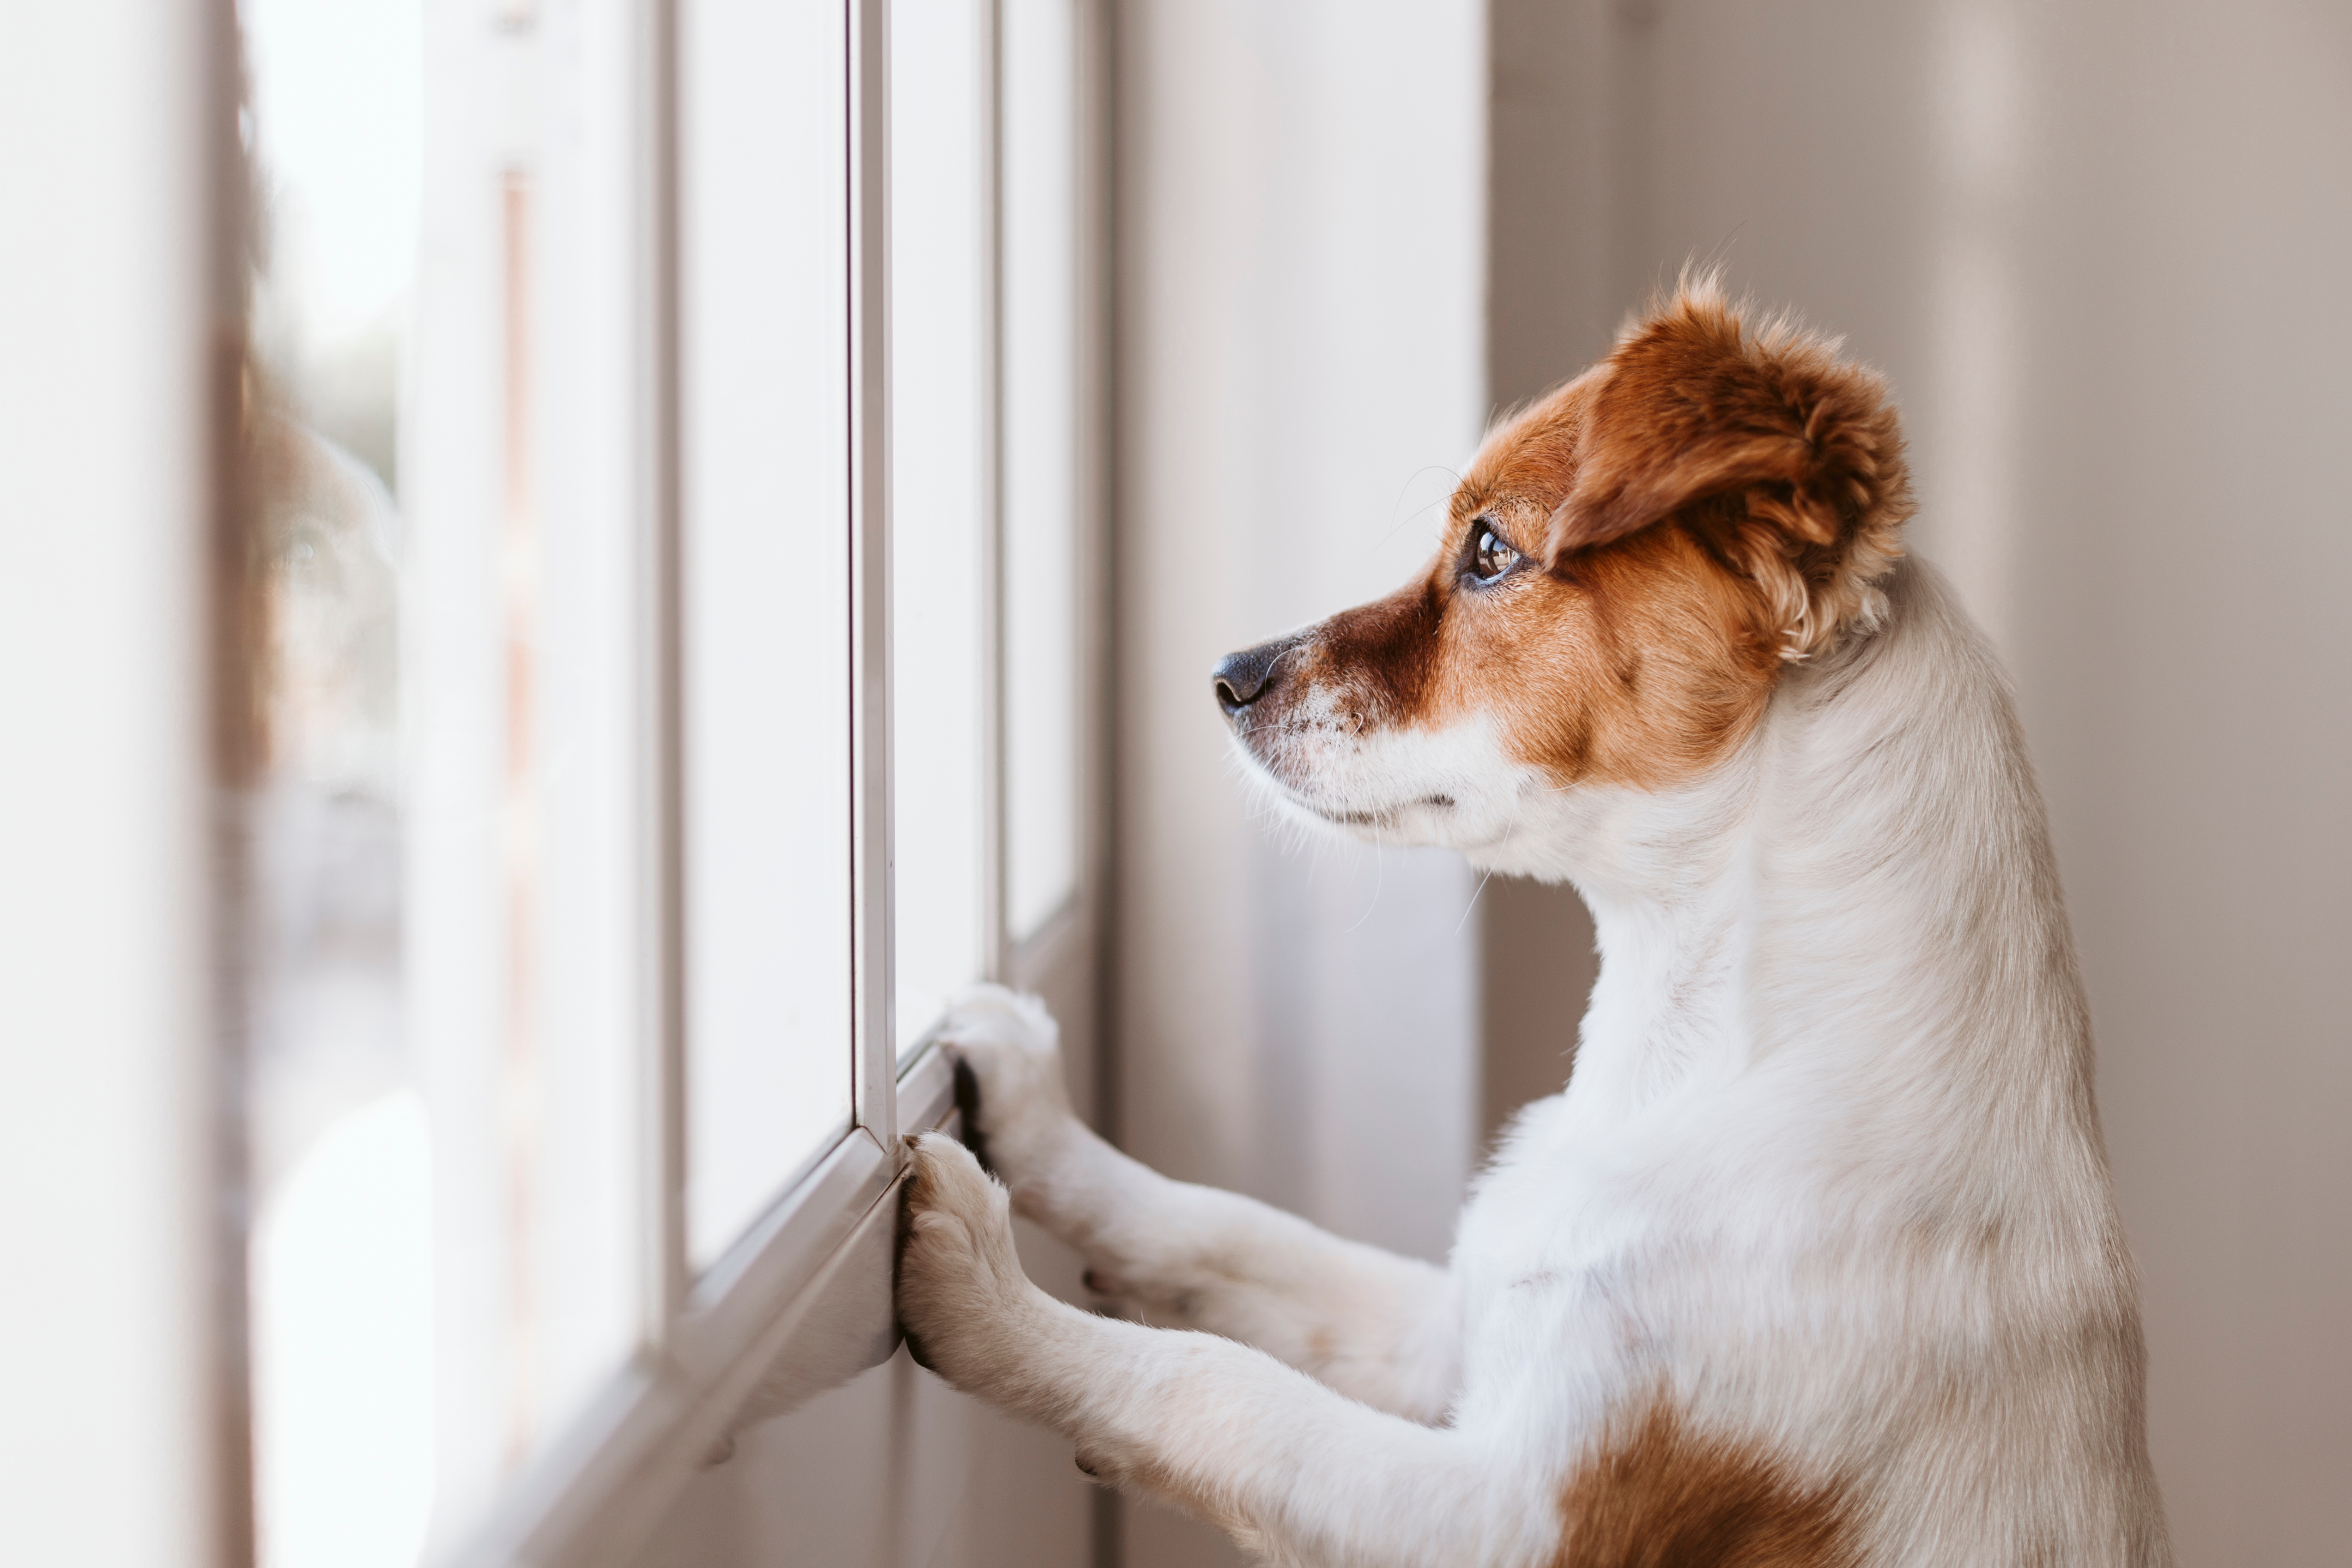 A dog looks out the window waiting for his owner to return